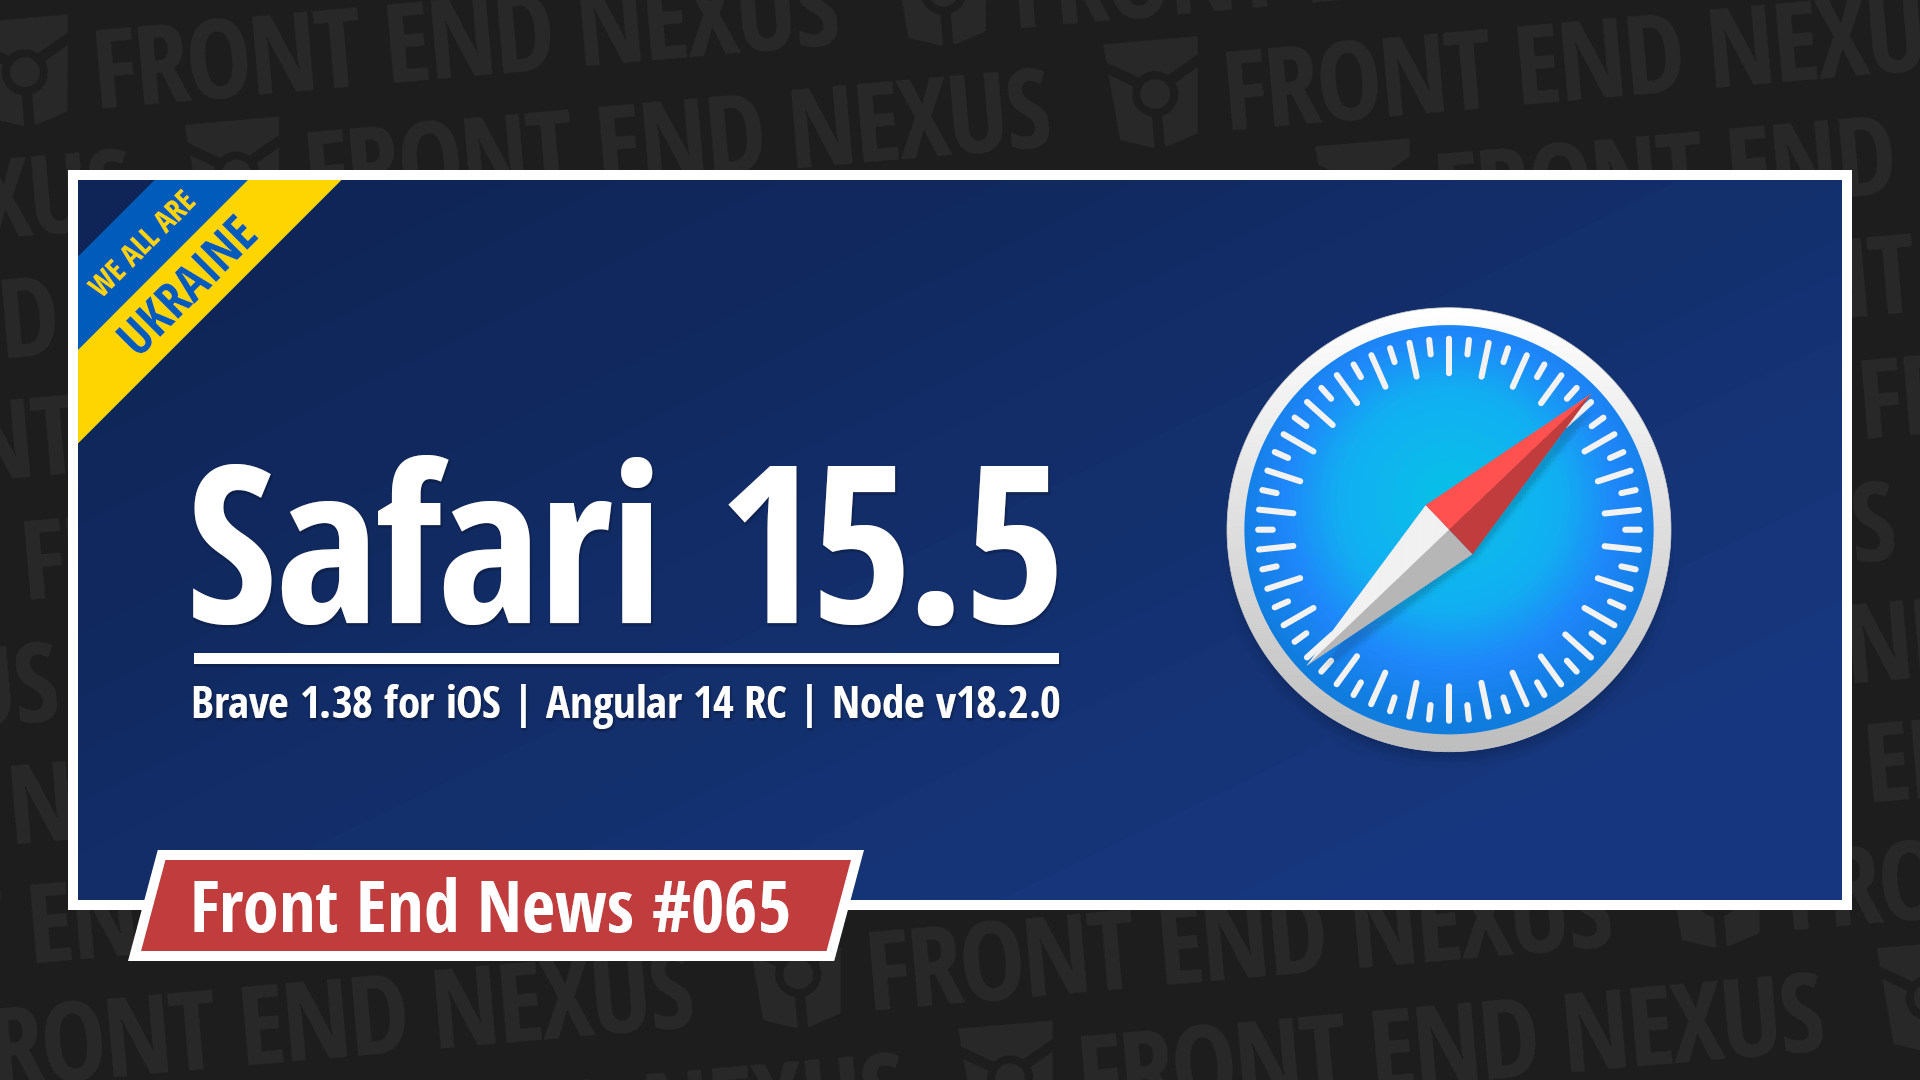 Safari 15.5 is here, Brave 1.38 for iOS, Angular 14 RC, Node v18.2.0, and more | Front End News #065